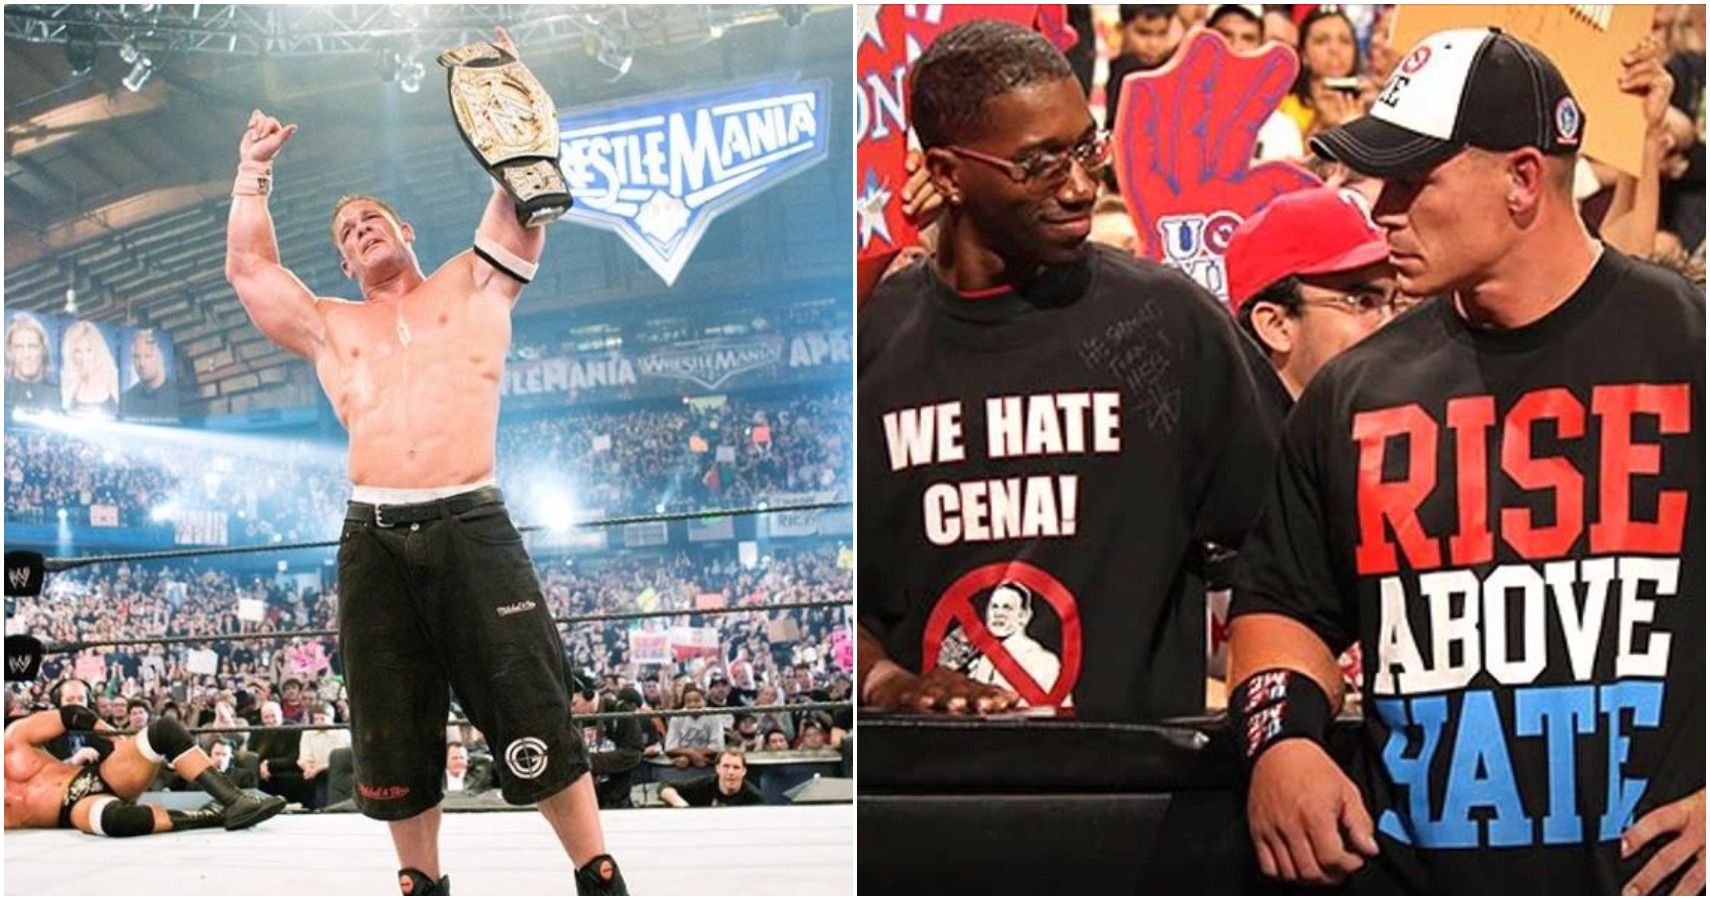 John Cena makes subtle reference to recent viral video at WWE